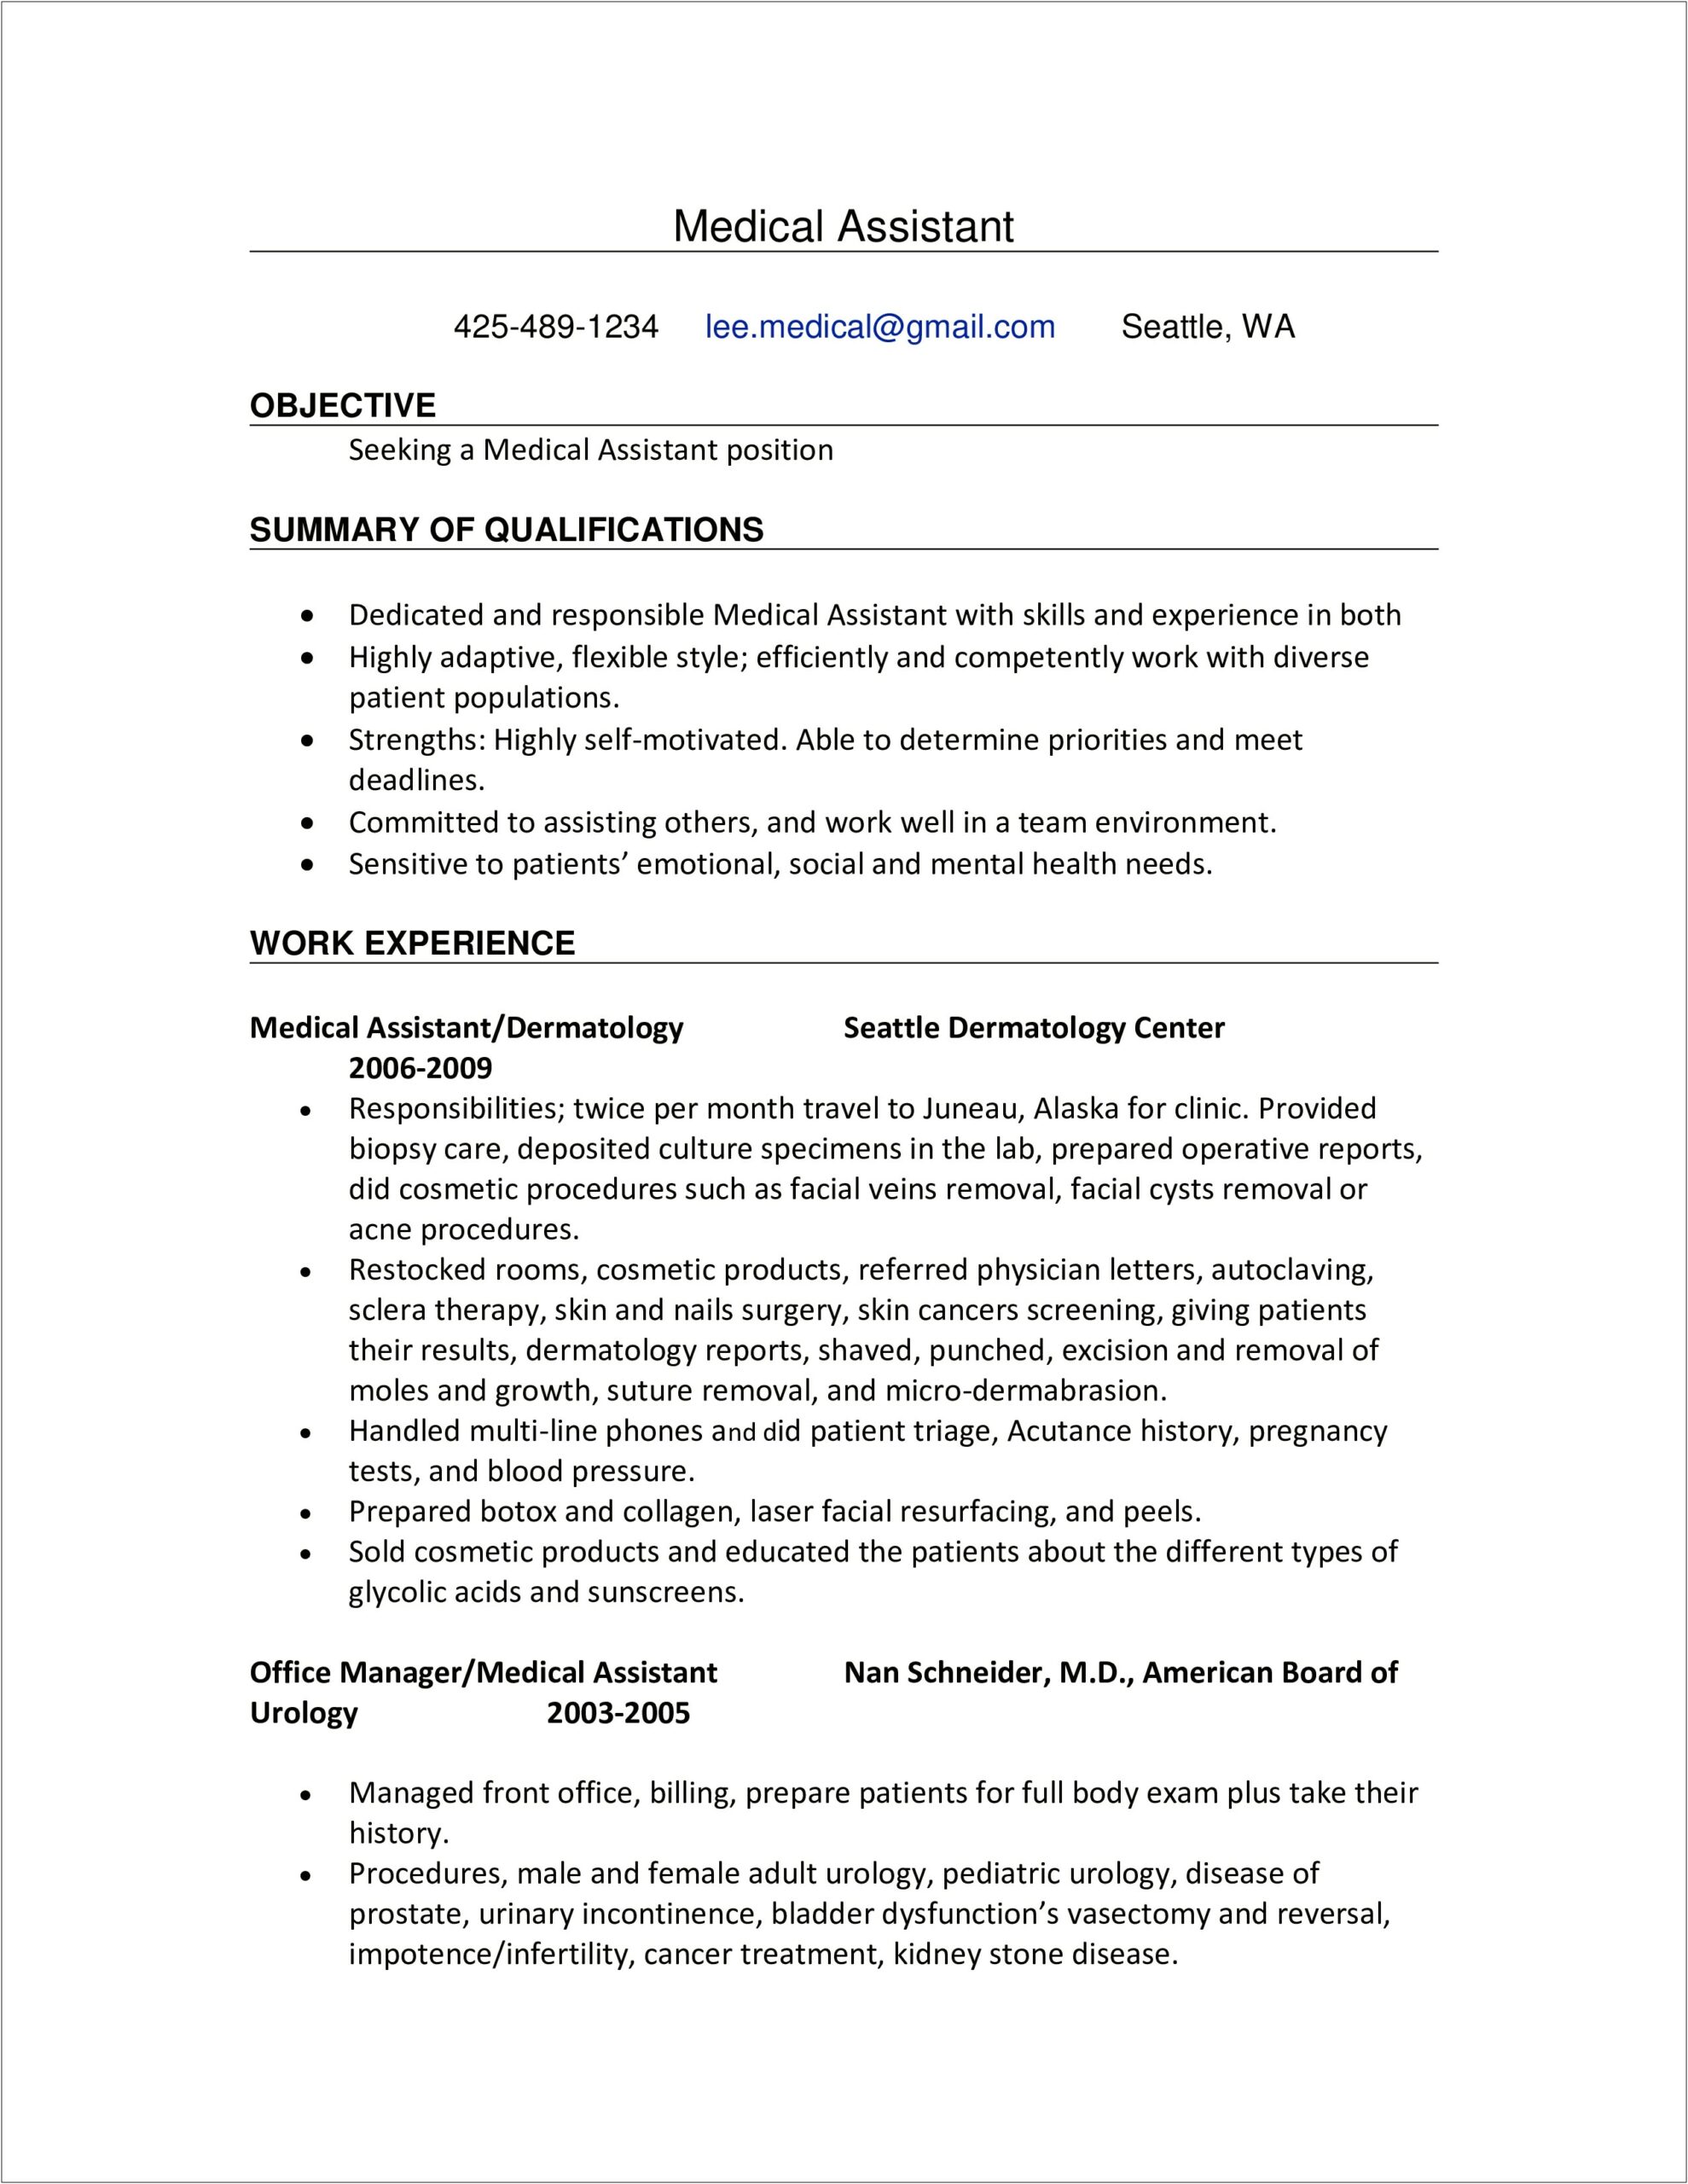 Resume Objective For Certified Medical Assistant